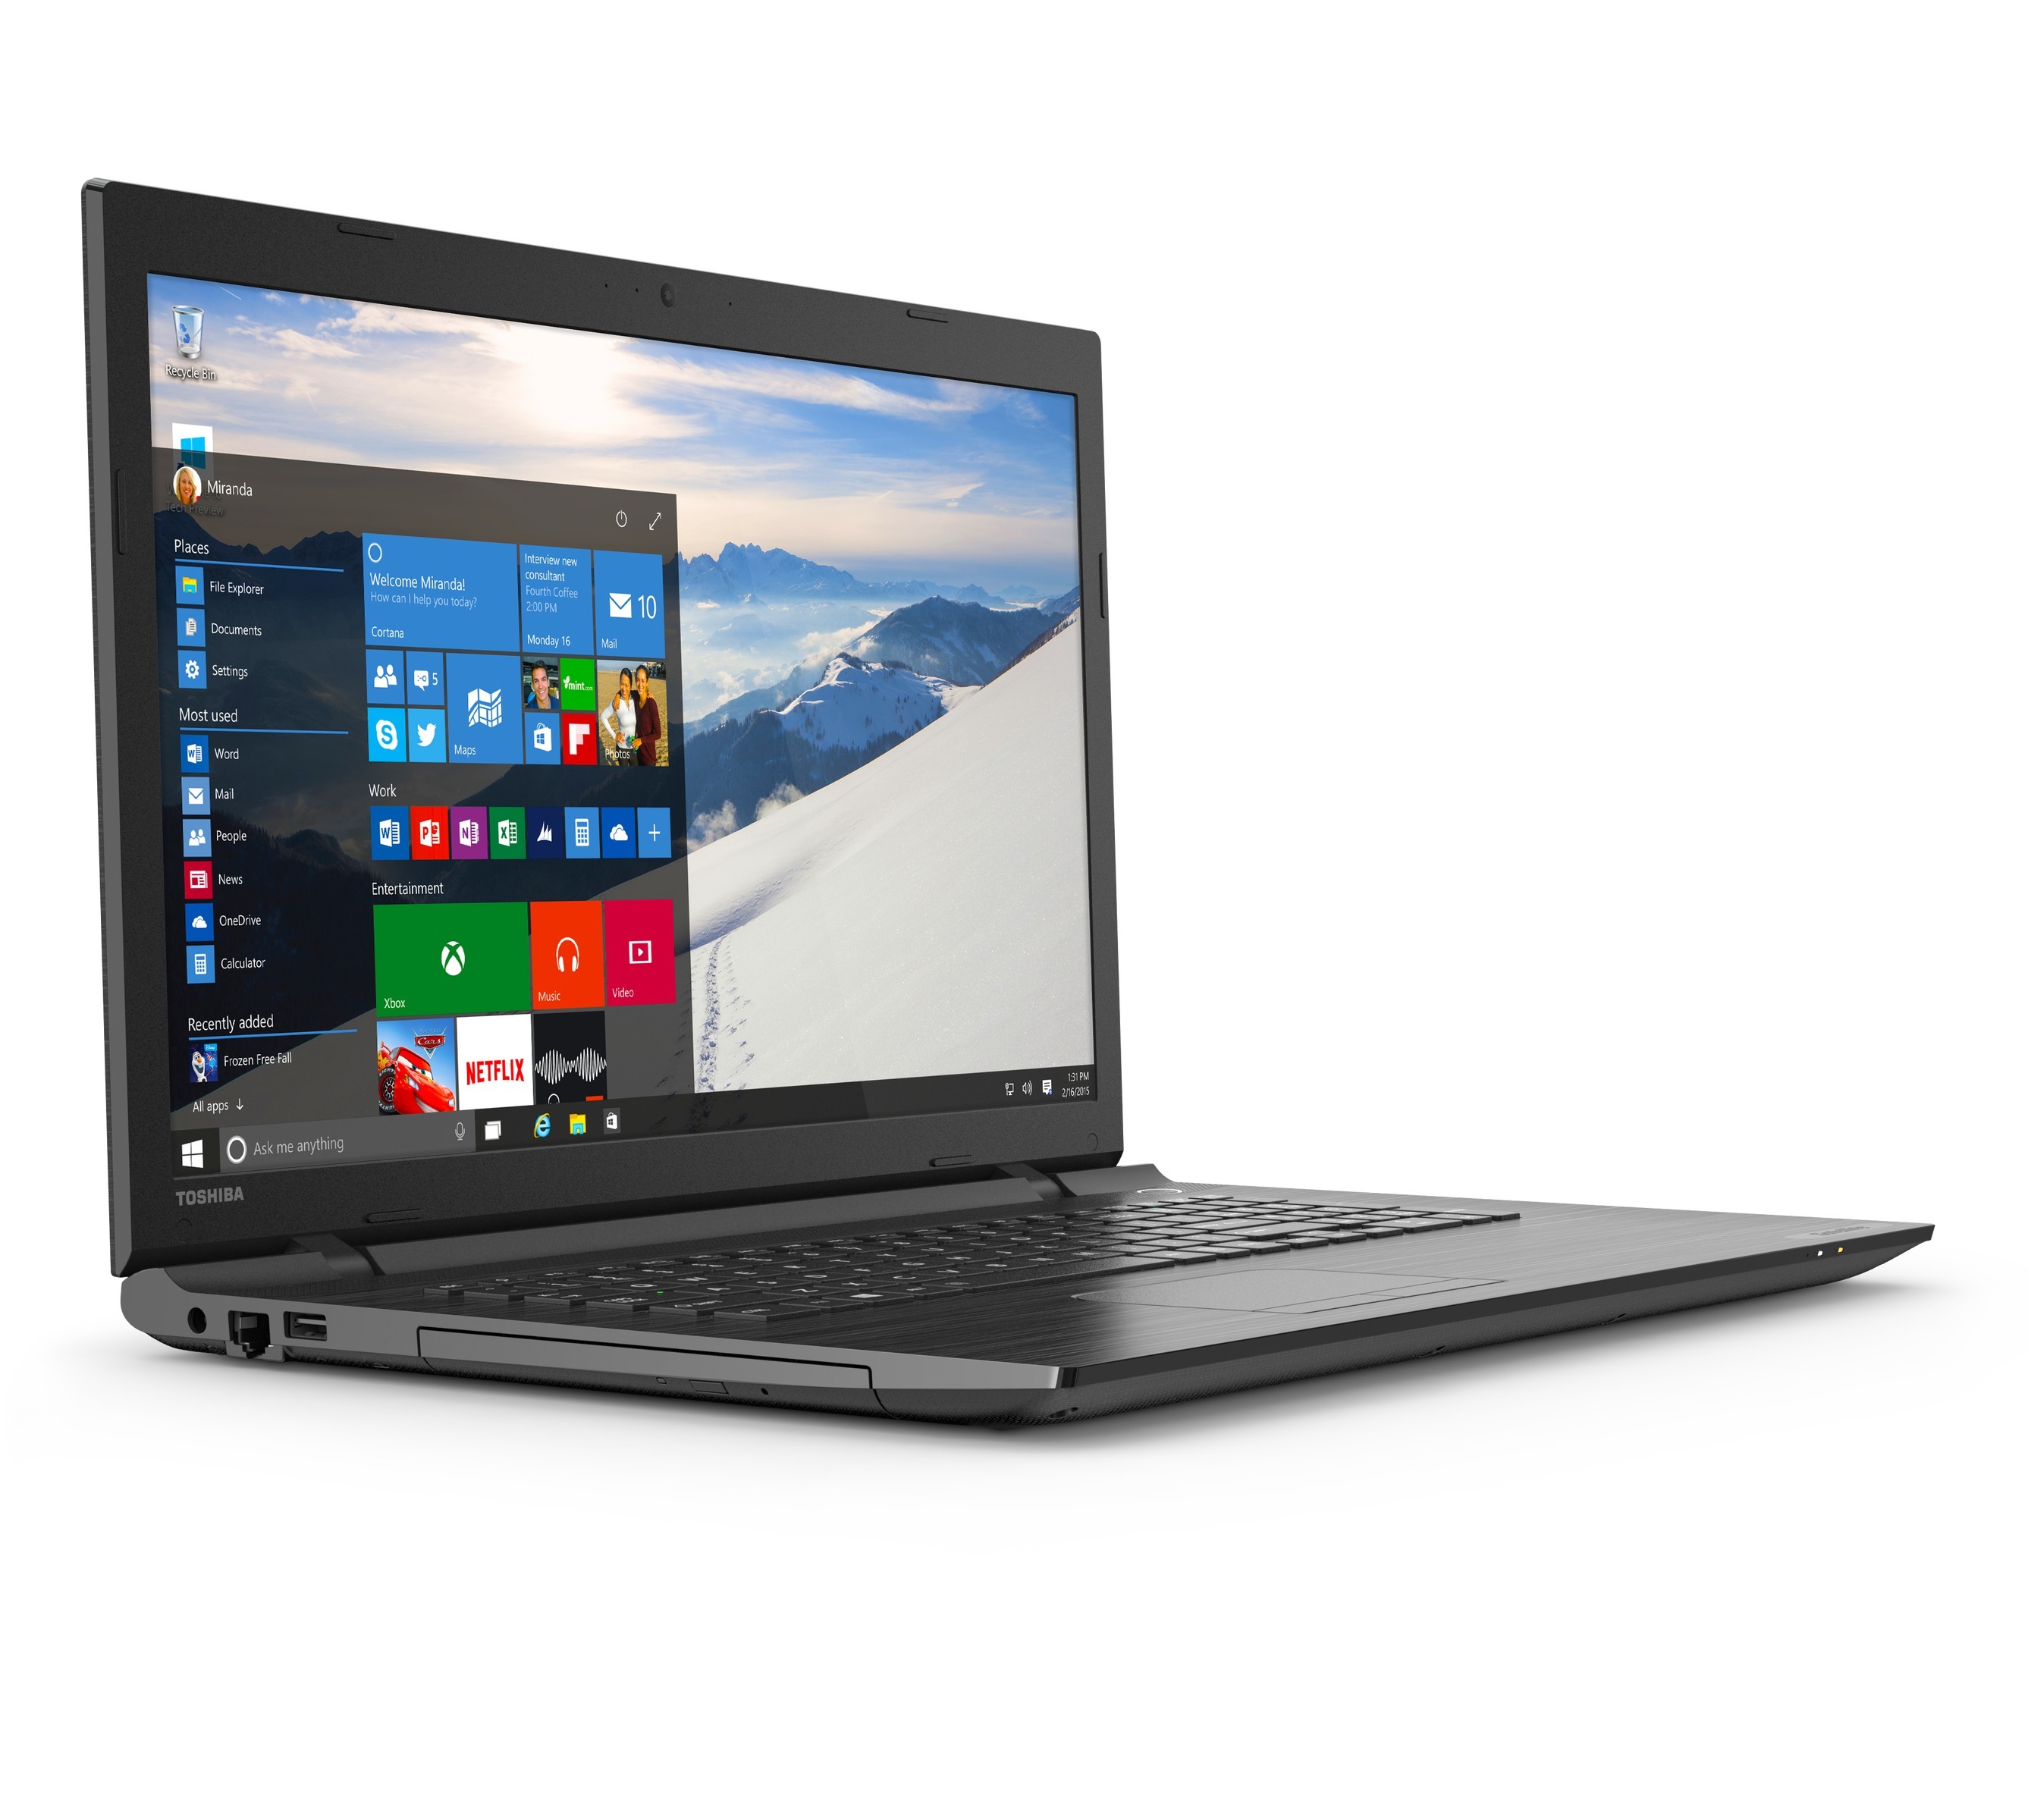 Toshiba Introduces New Satellite C Series Laptops: Packed with